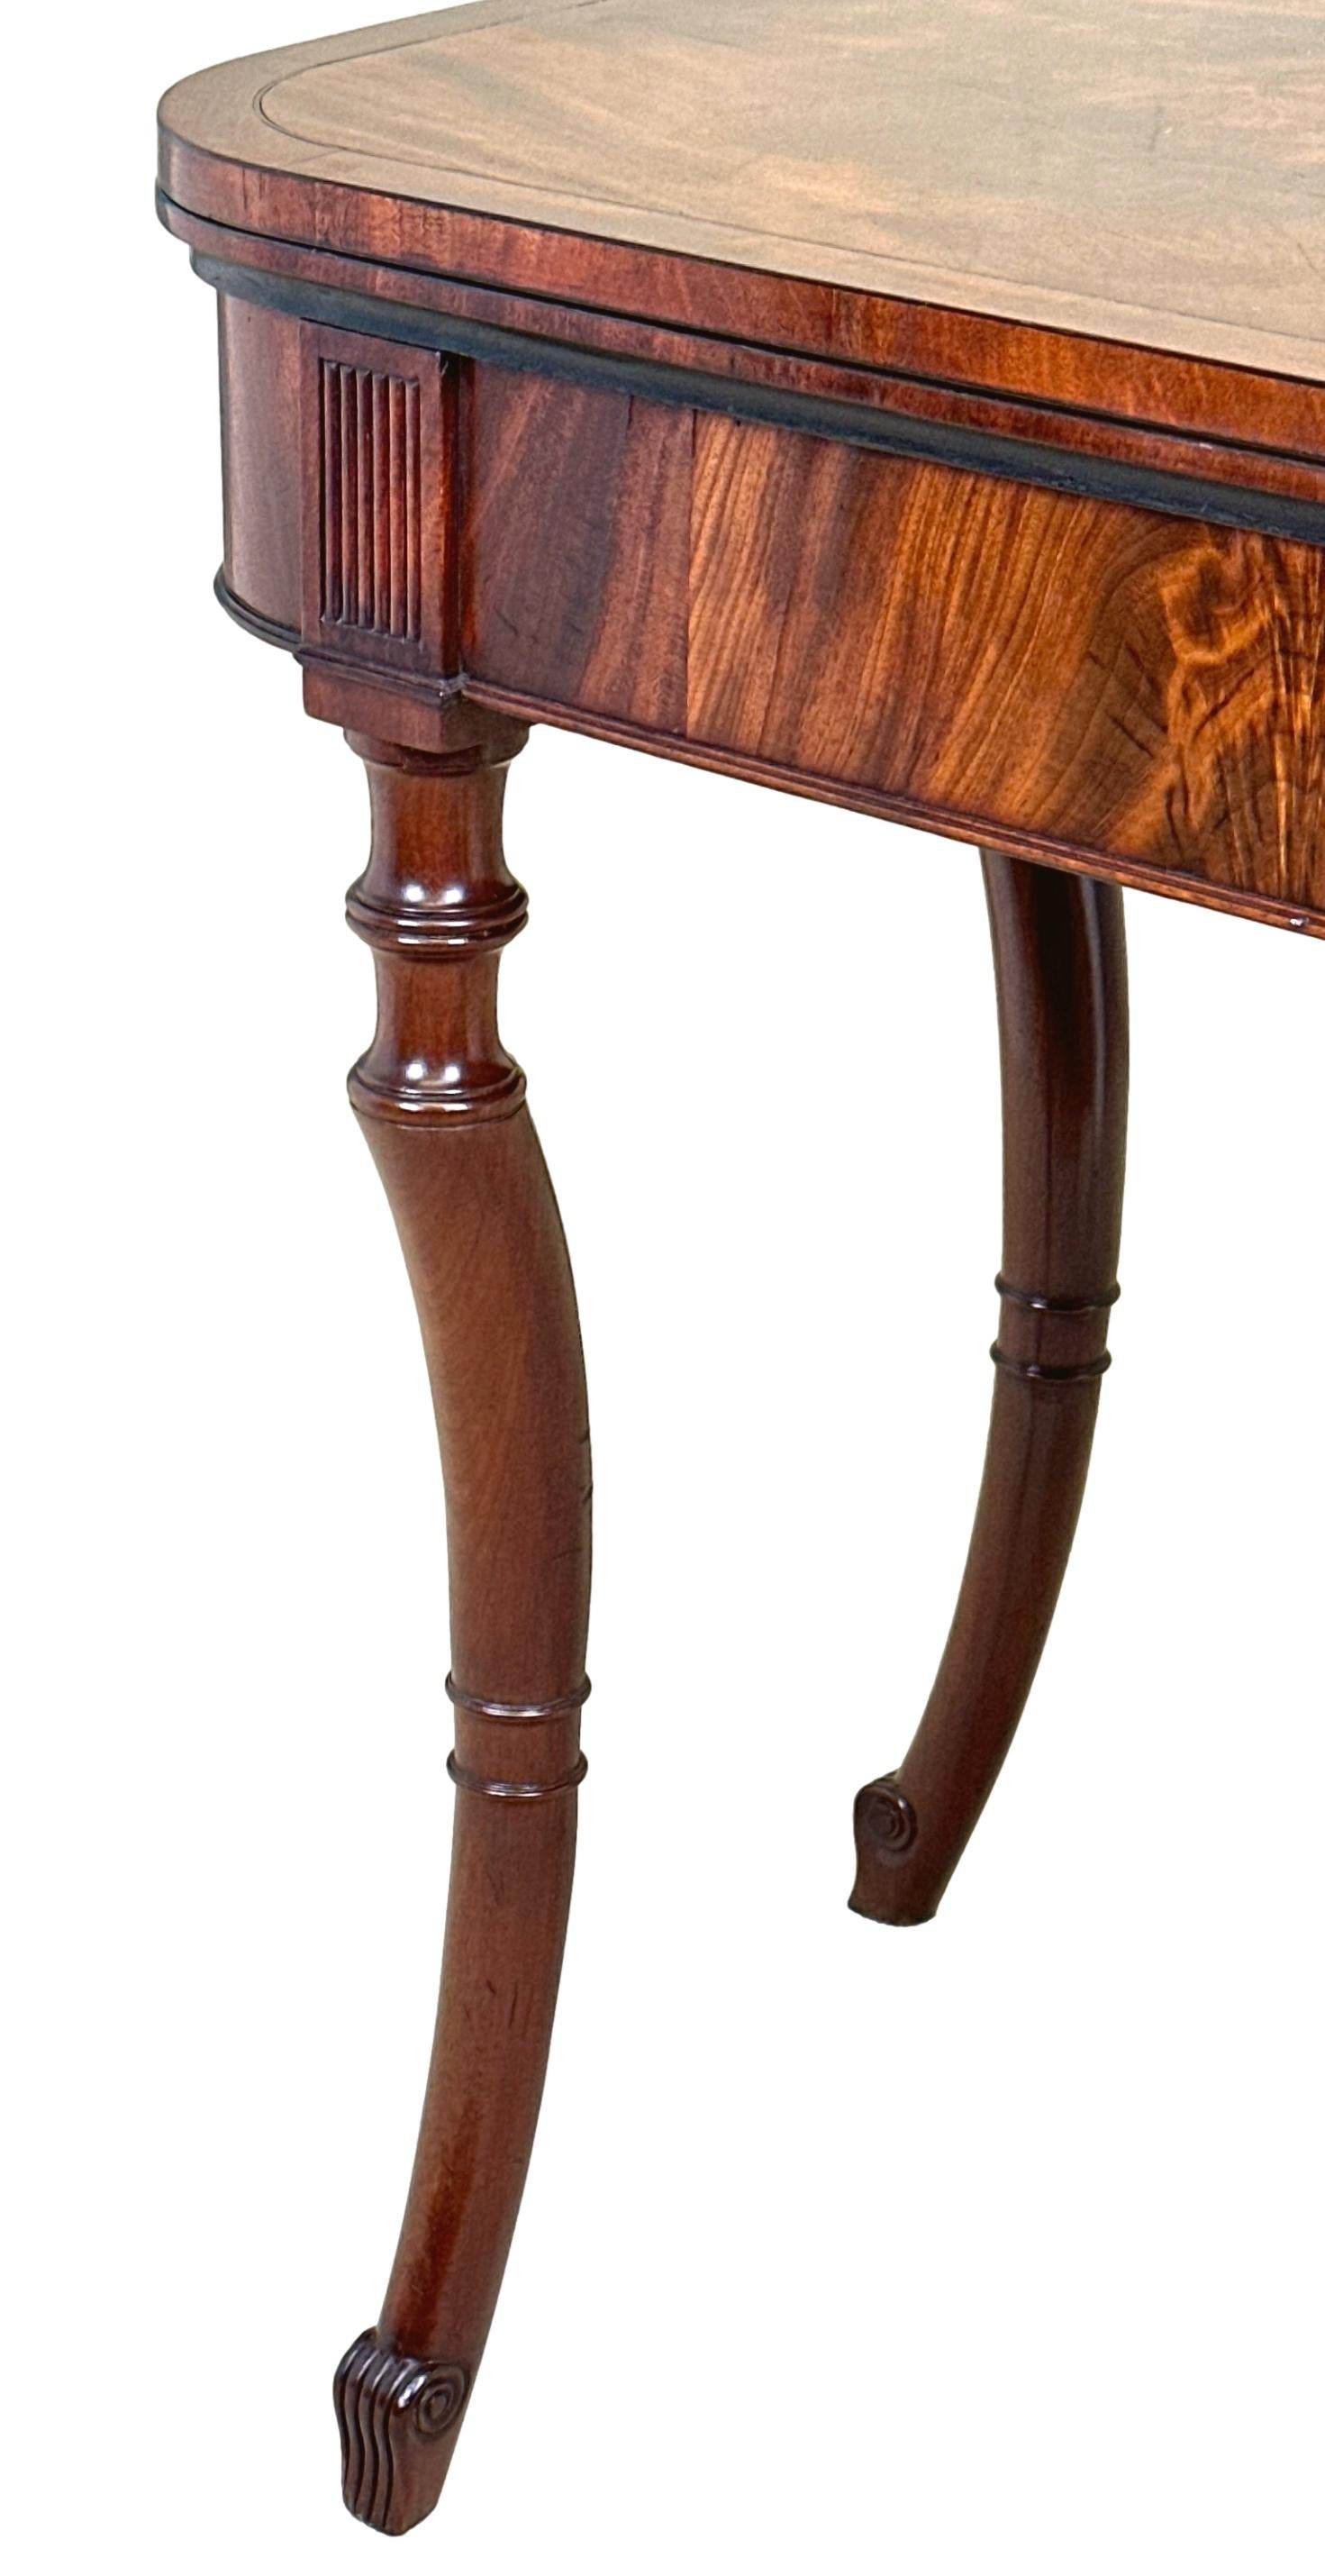 Unusual Regency Mahogany Tea Table In Good Condition For Sale In Bedfordshire, GB